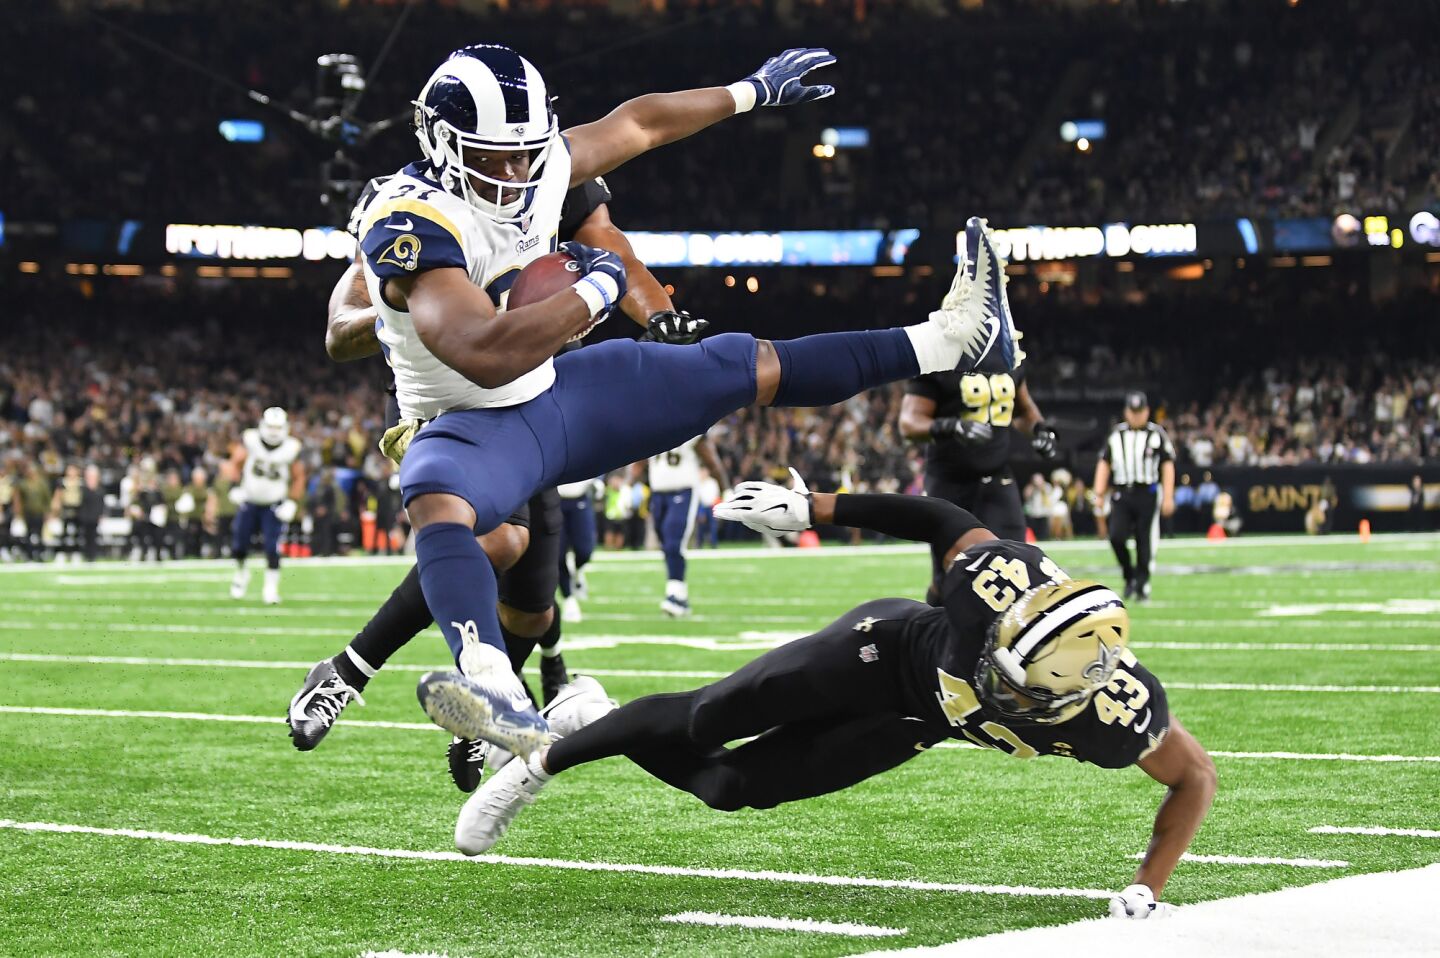 Rams running back Malcolm Brown leaps over Saints safety Marcus Williams to score a touchdown in the 3rd quarter at the Mercedes Benz Superdome in Louisiana.